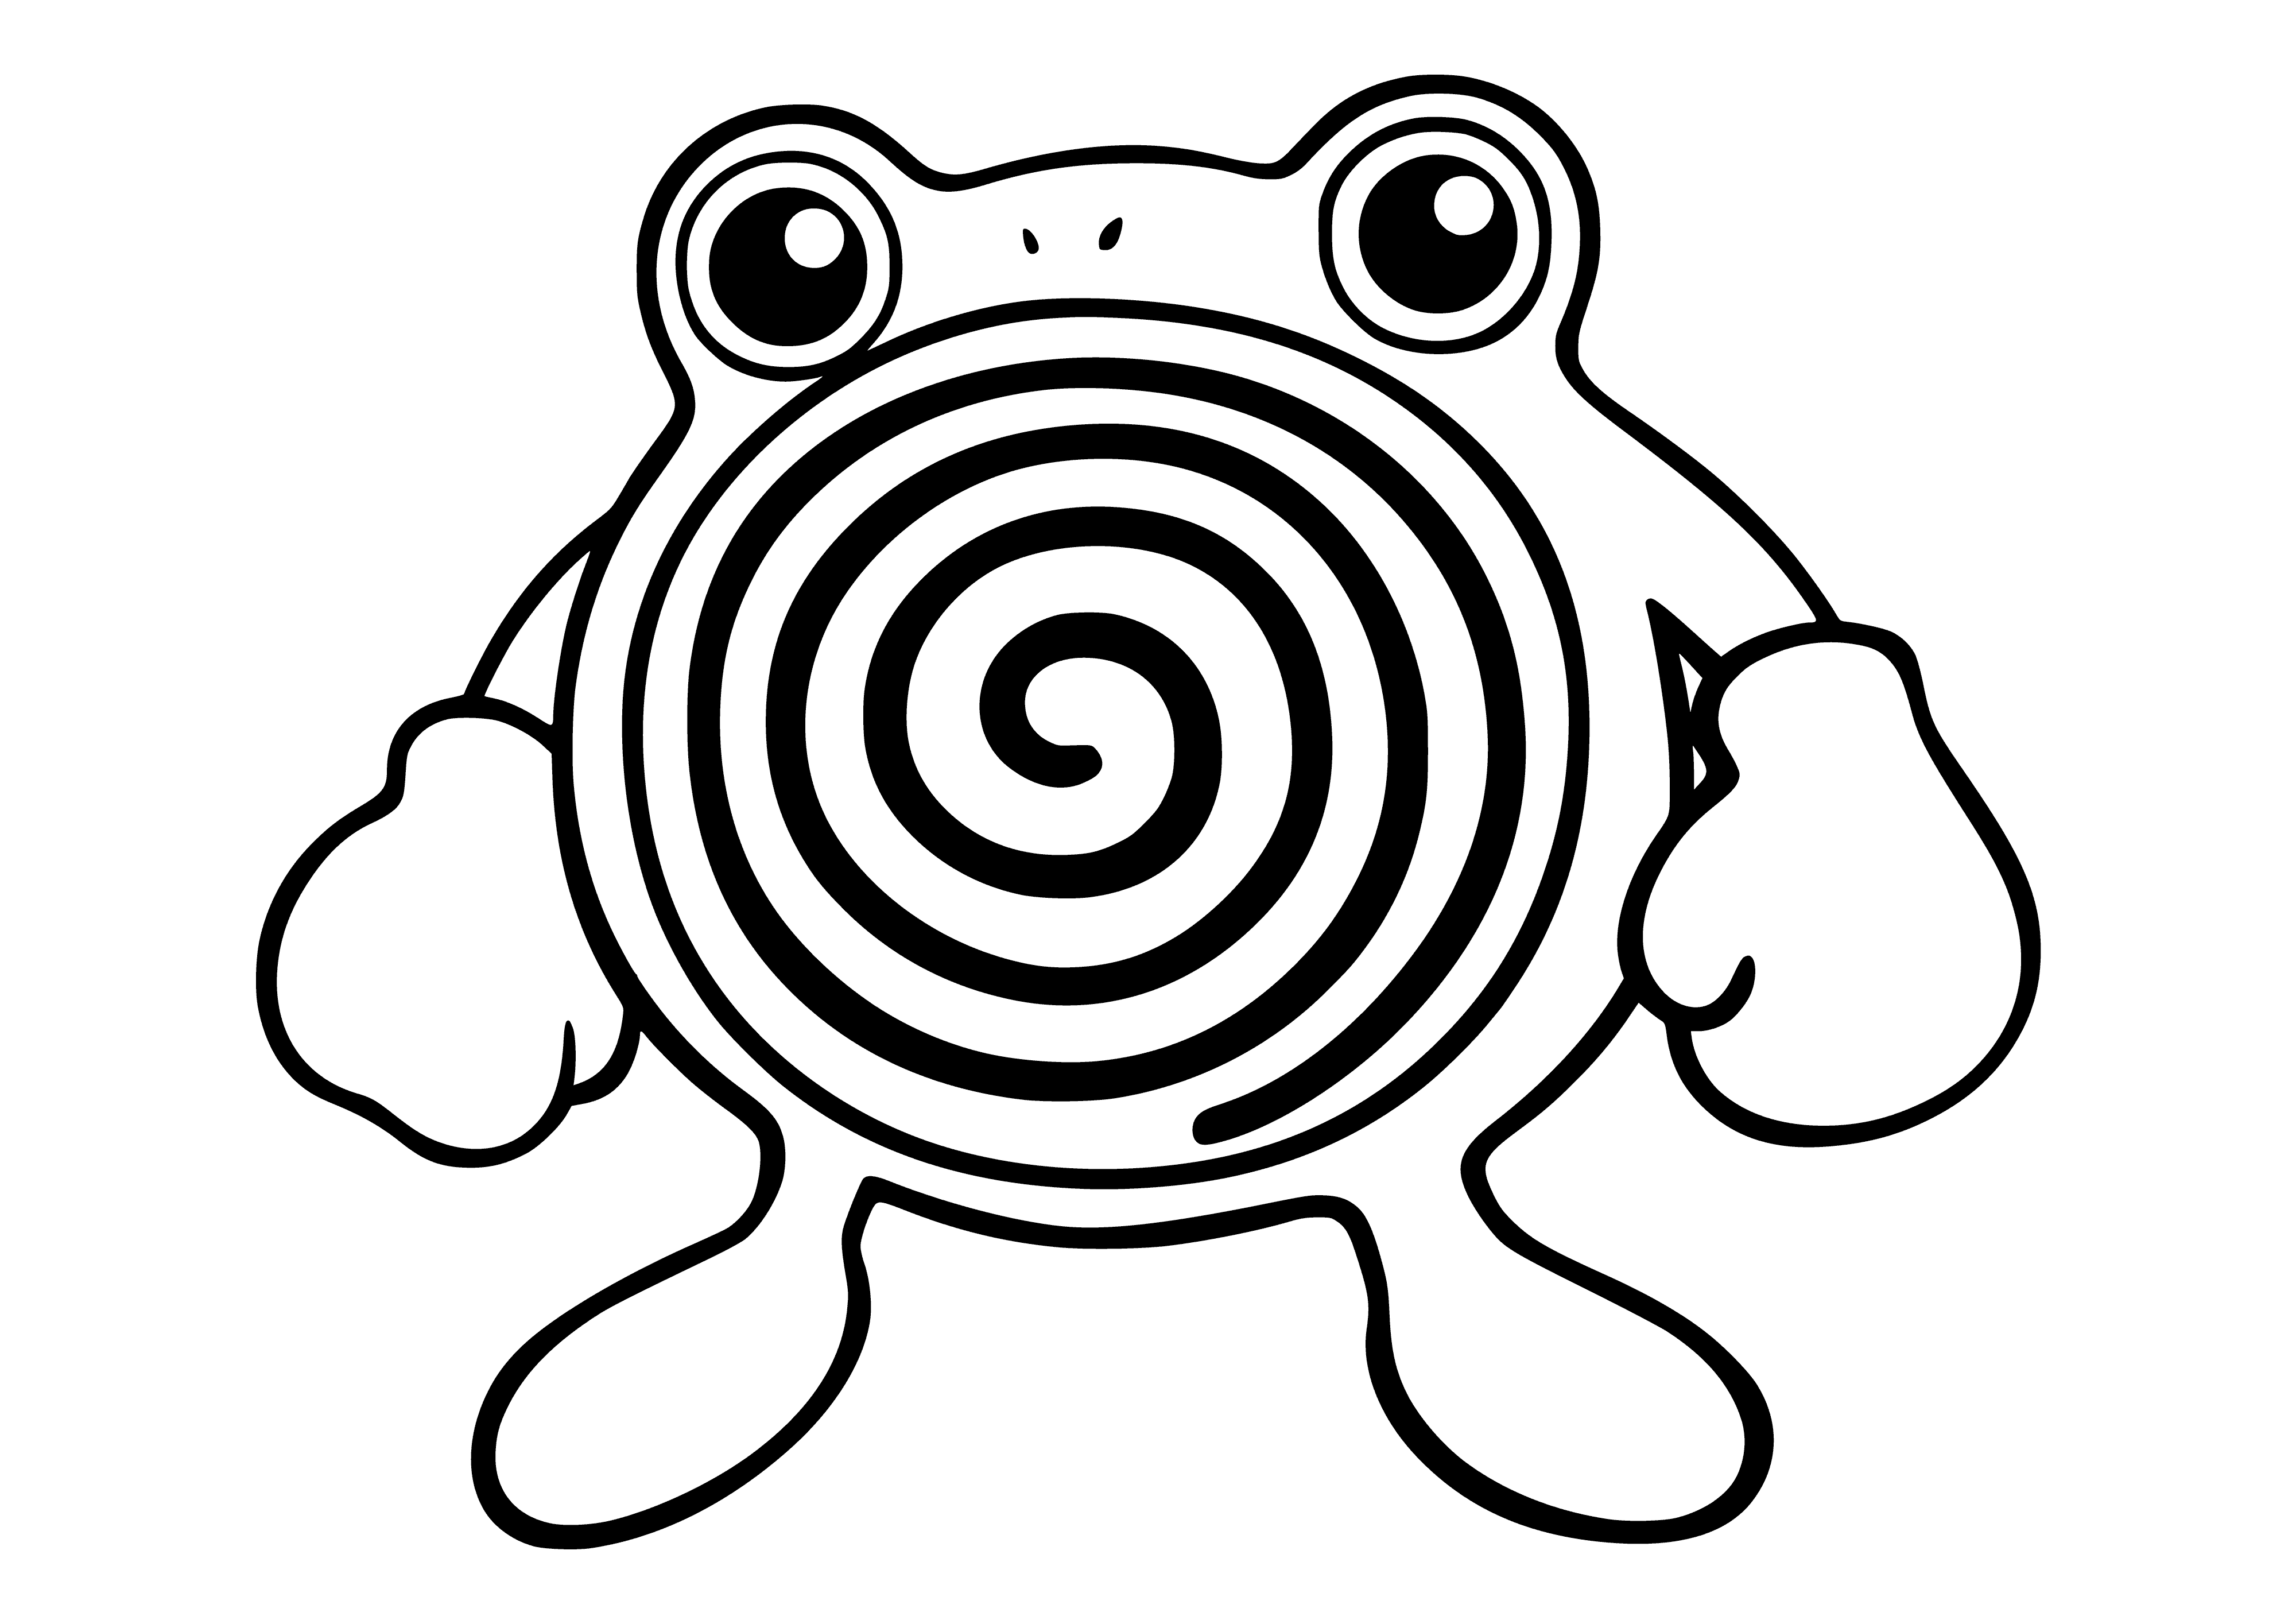 coloring page: Blue Pokemon w/ white belly, red spiral & fin-like legs/arms. Big eyes & small body. #Pokemon